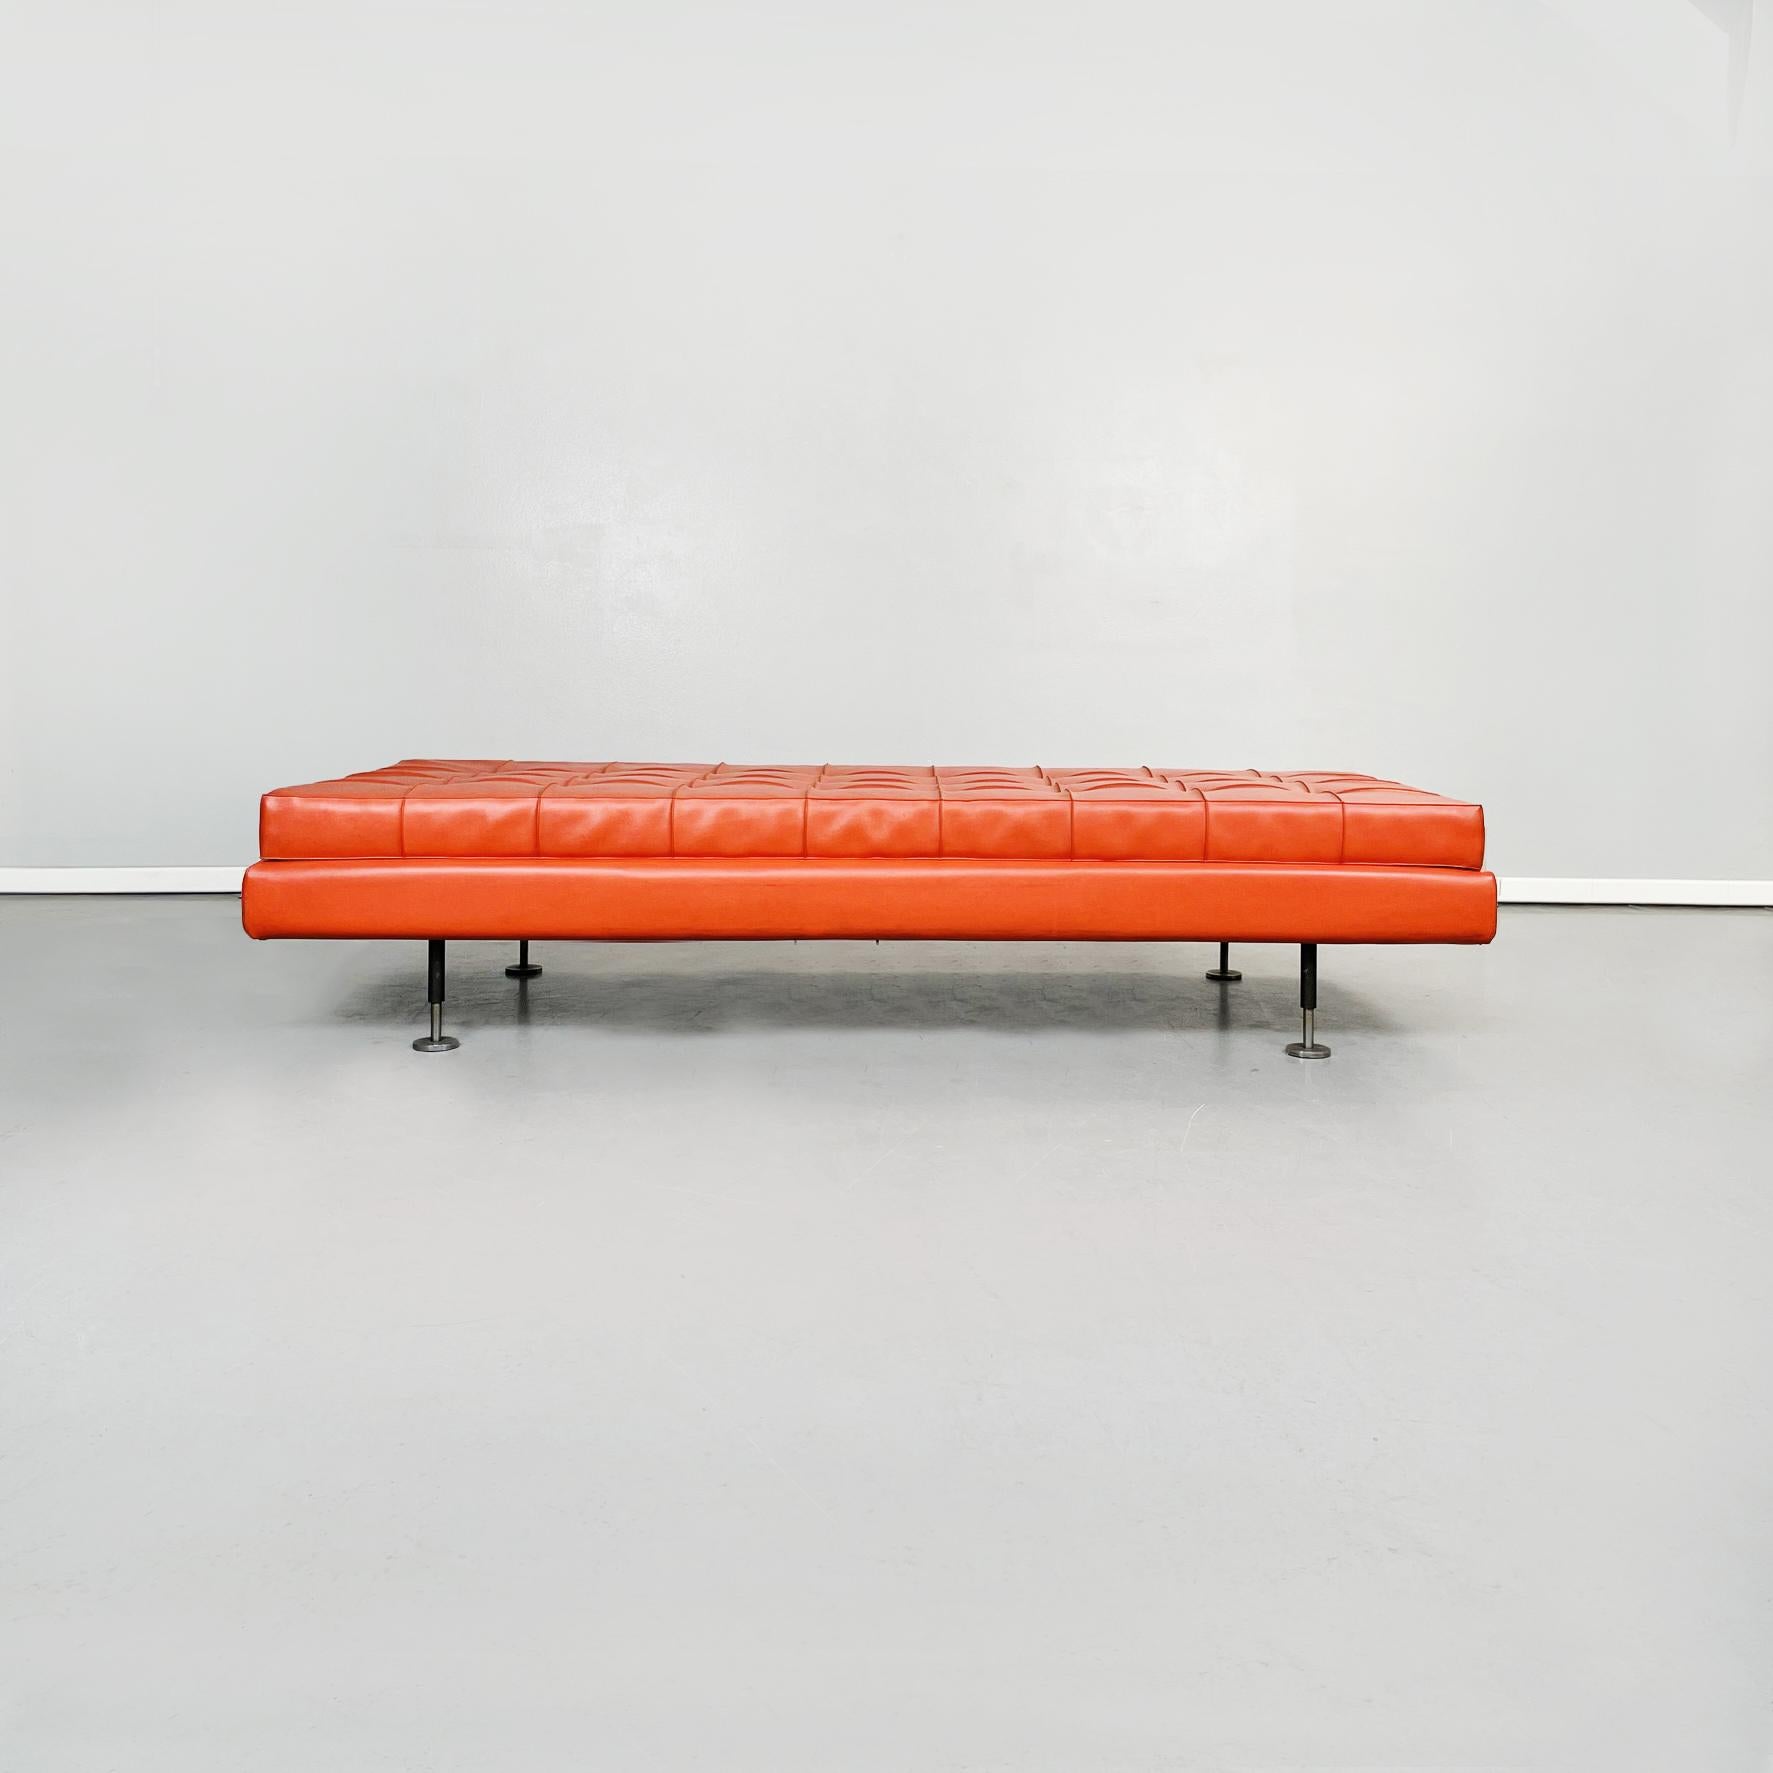 Italian Mid-Century Modern Orange red leather daybed, 1970s
Daybed with rectangular seat in bright orange / red leather. Round buttons on the seat. Round metal and black painted metal feet.

1970s

Very good conditions, the original leather